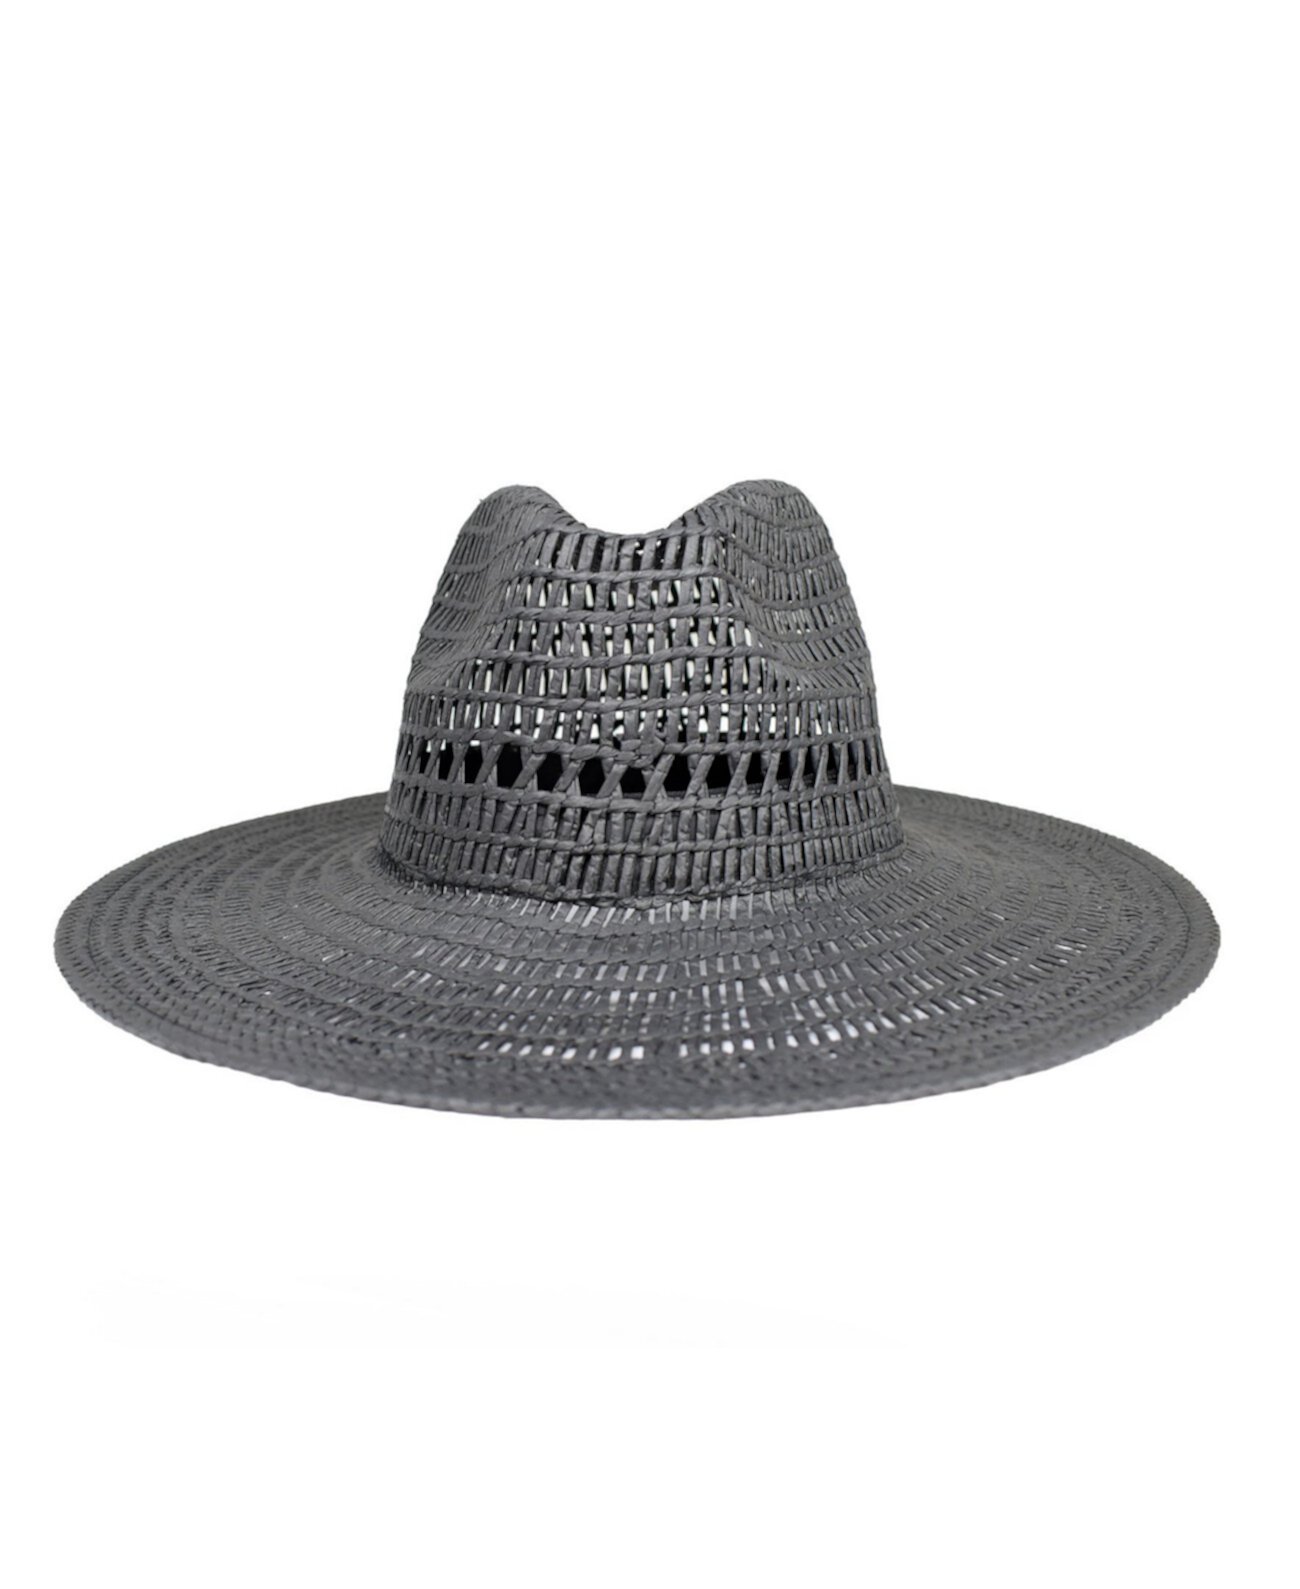 Women's Straw Hat with Cut Out Detail Marcus Adler